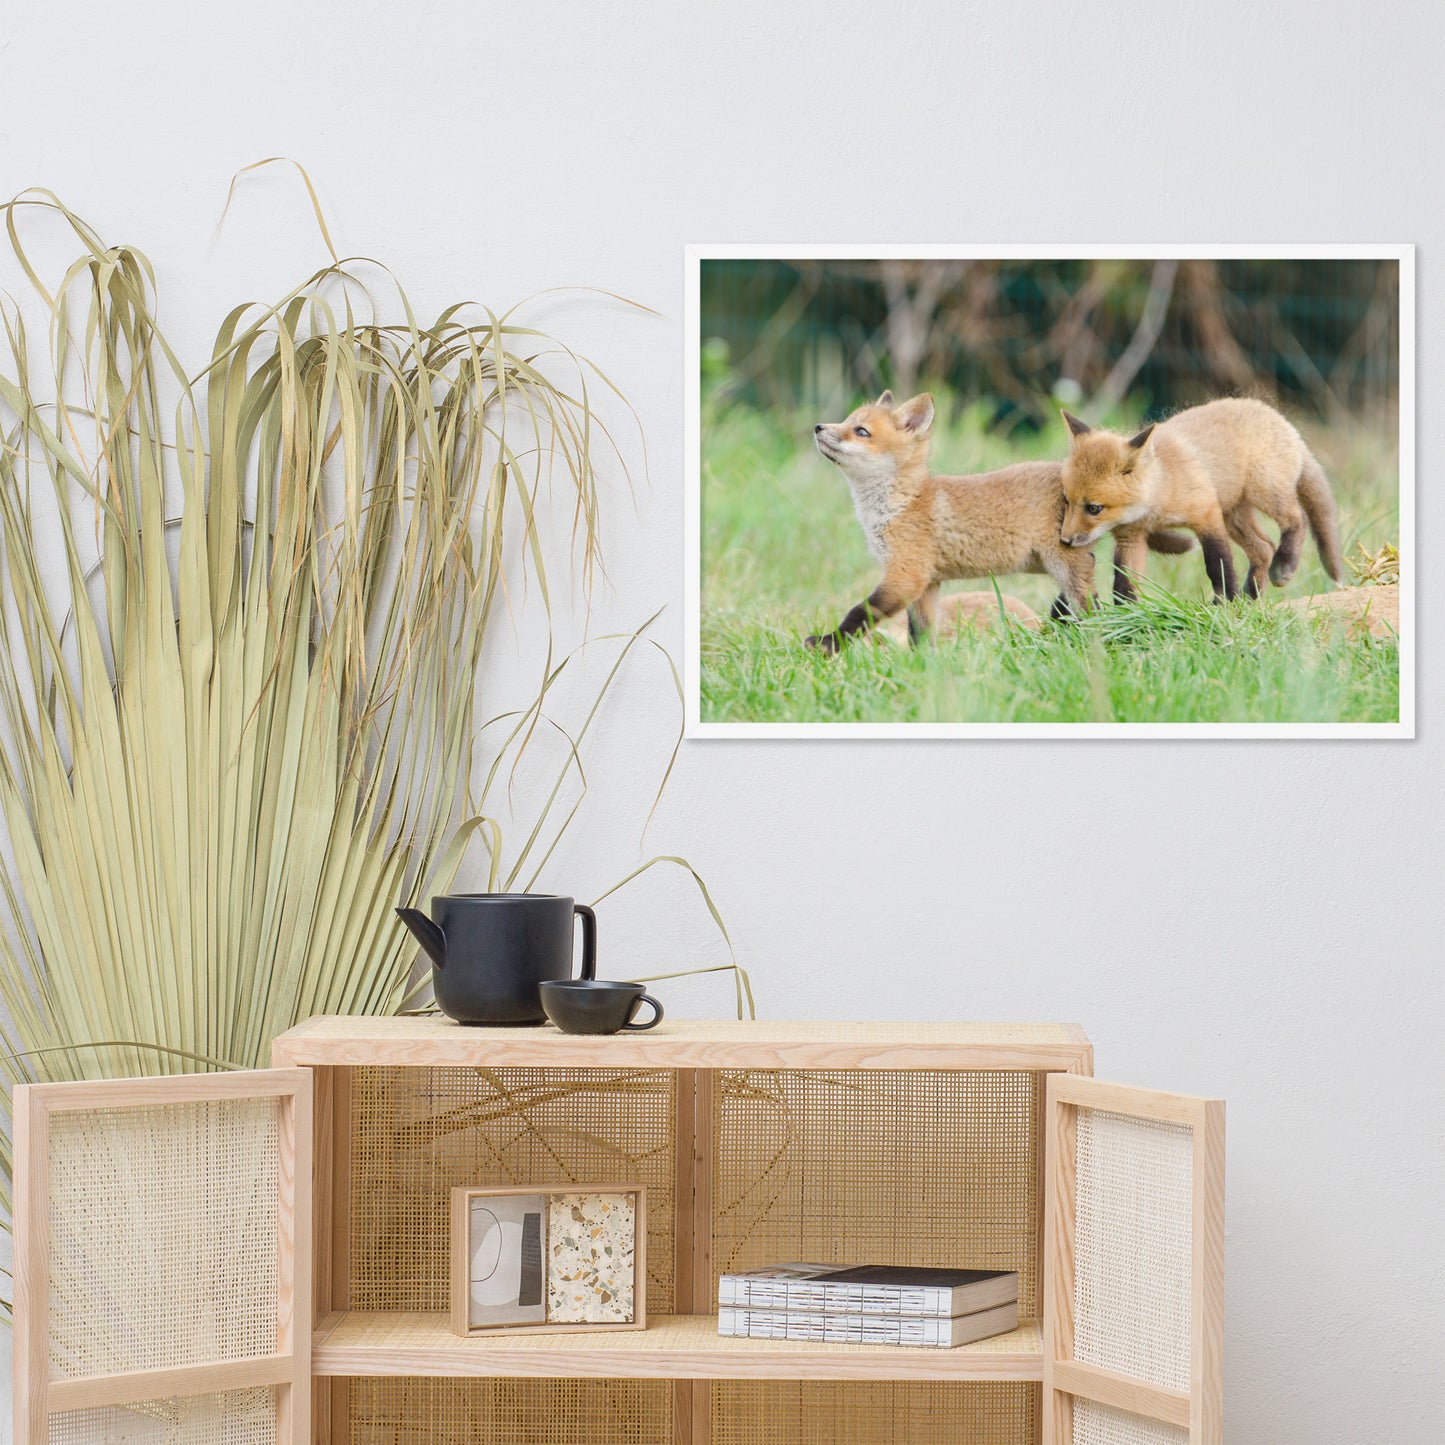 Childrens Bedroom Wall Decor: Playful Baby Red Fox Pups In Field - Animal / Wildlife / Nature Artwork - Wall Decor - Framed Wall Art Print